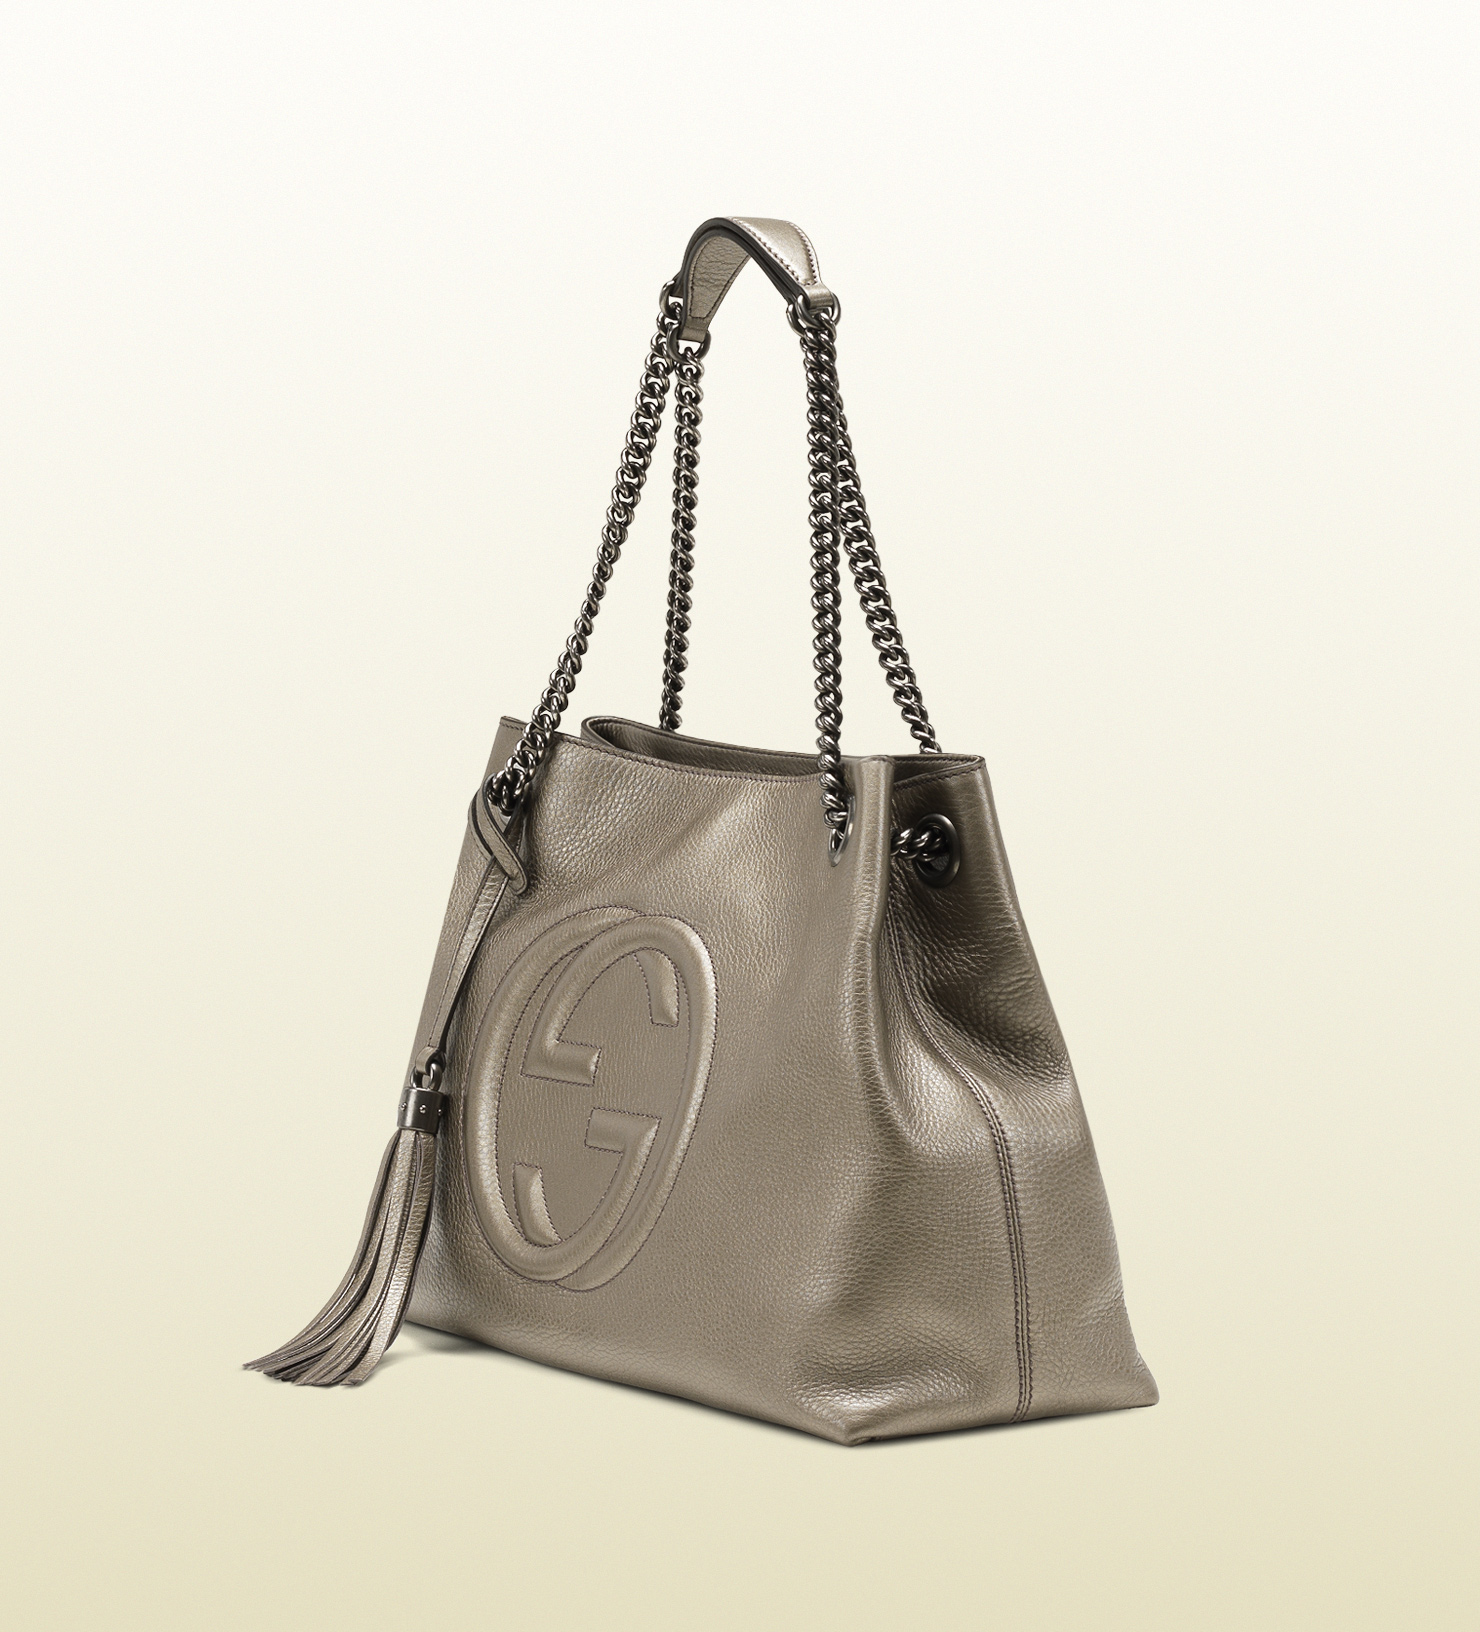 Gucci Soho Metallic Leather Shoulder Bag in Gray - Lyst